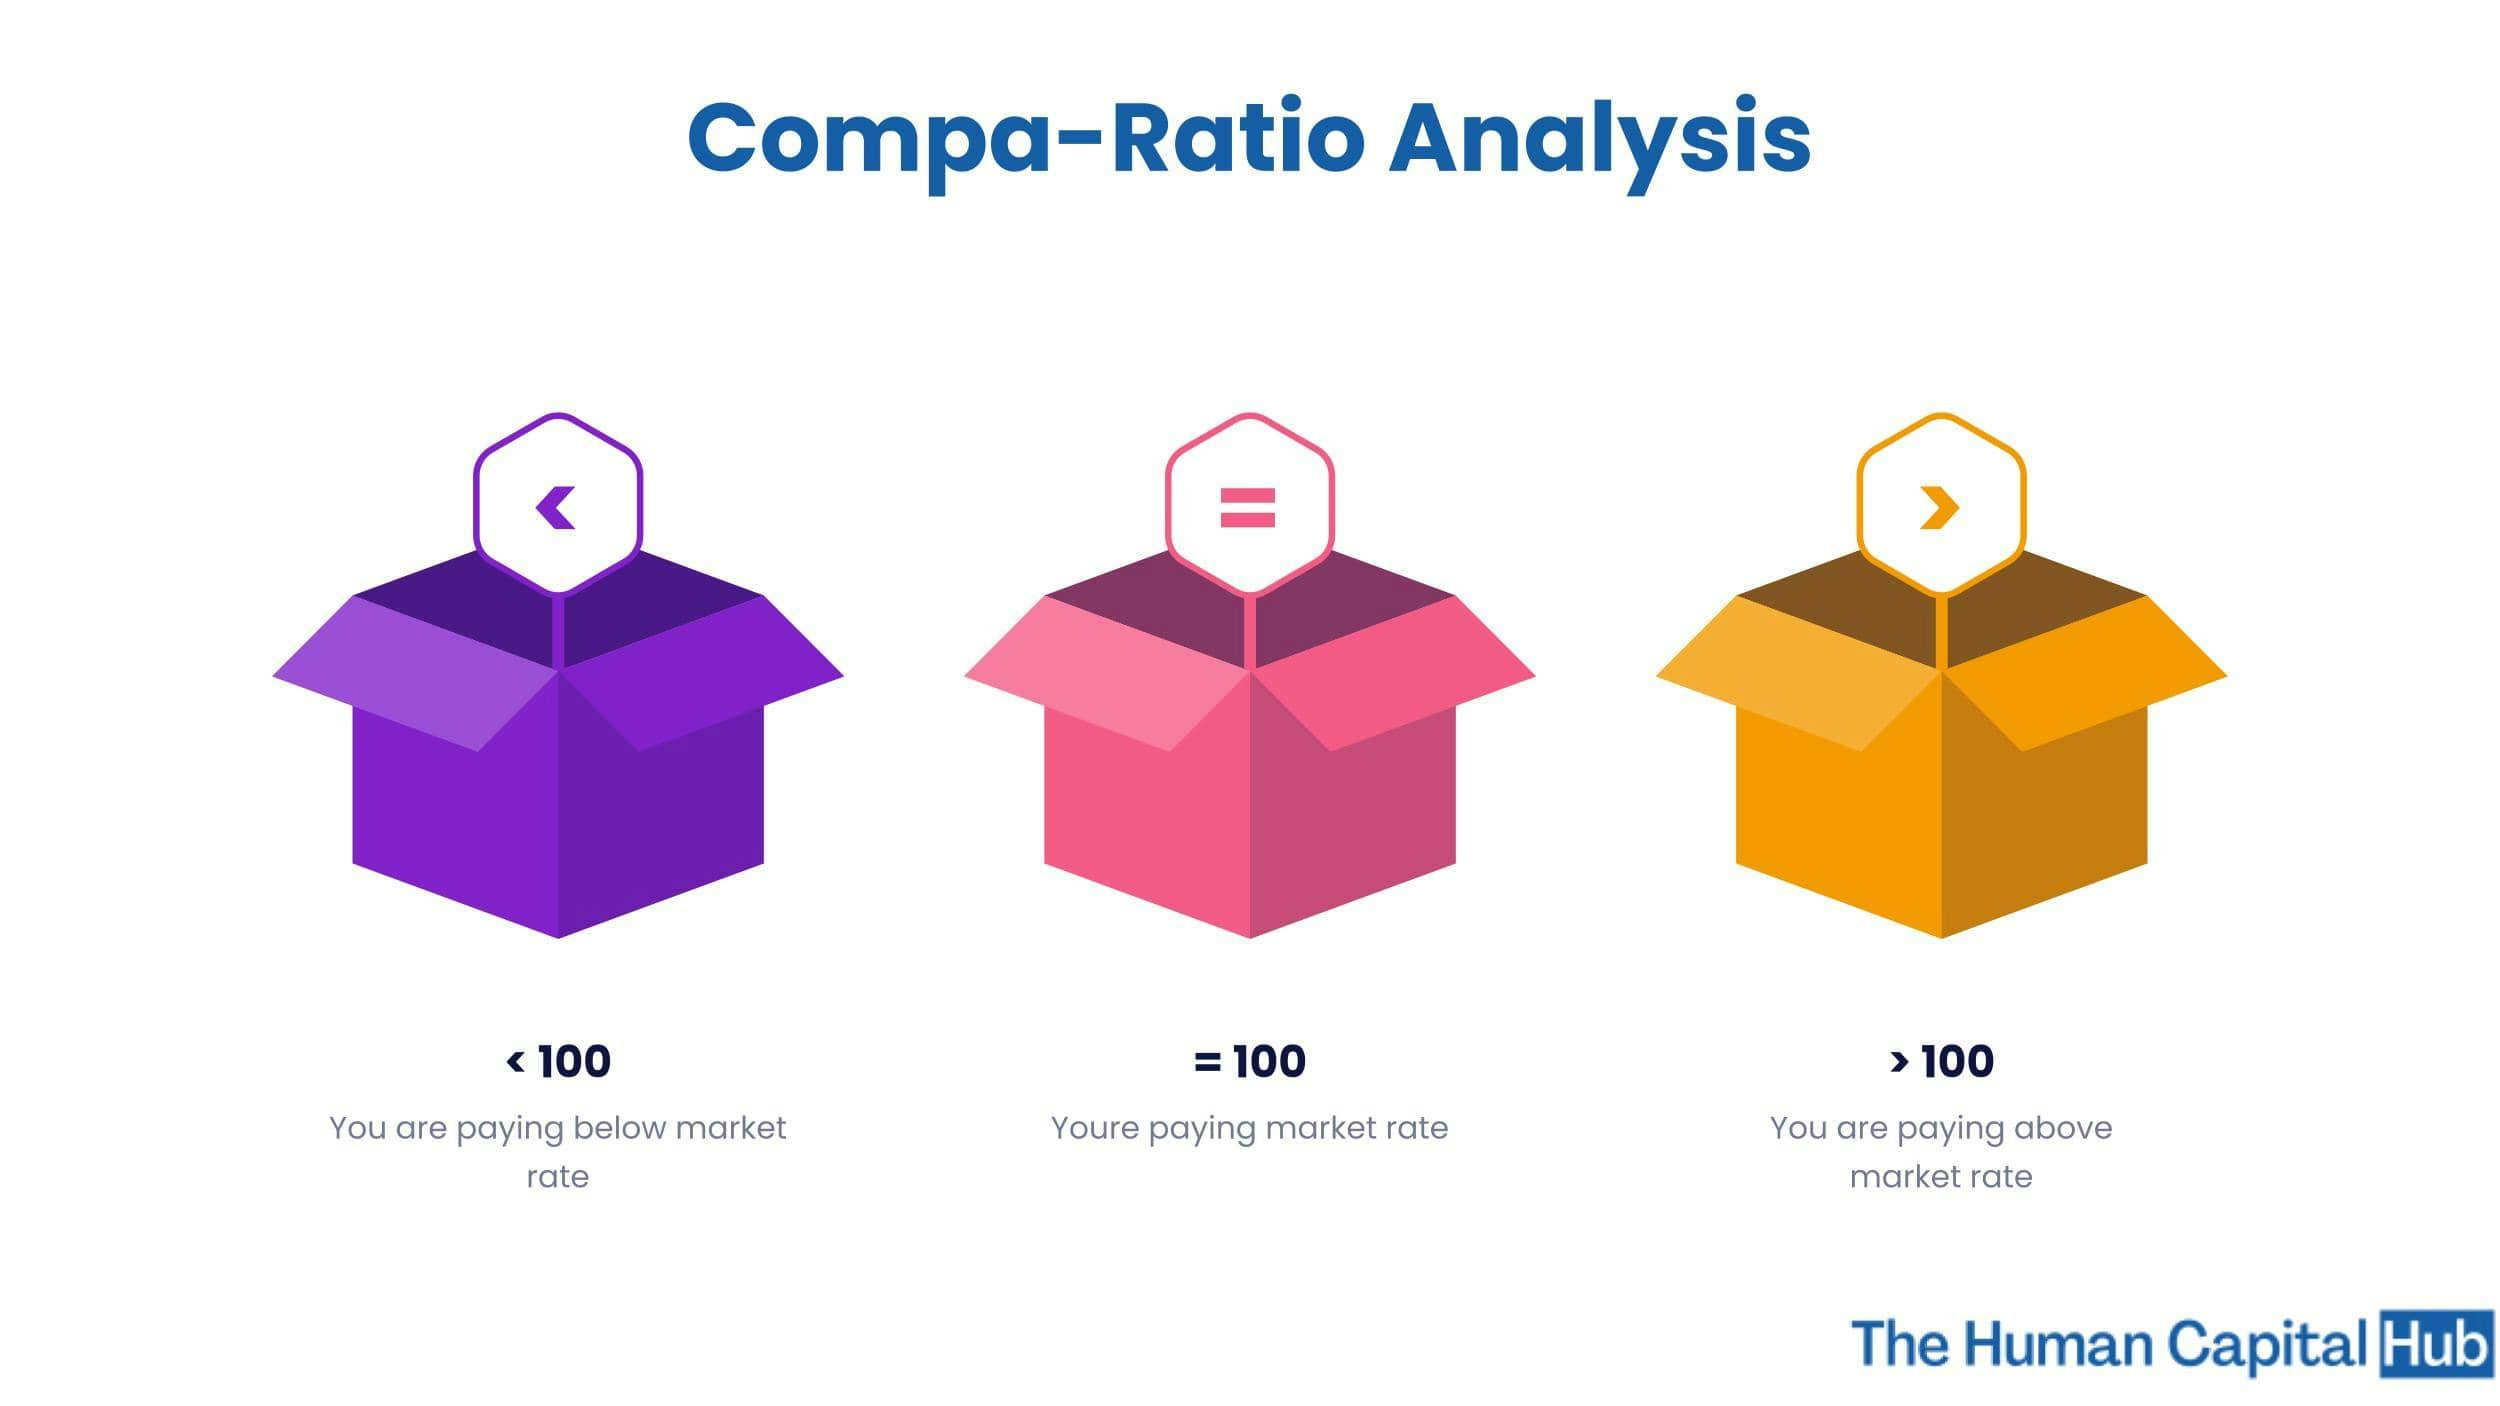 What is Compa-Ratio